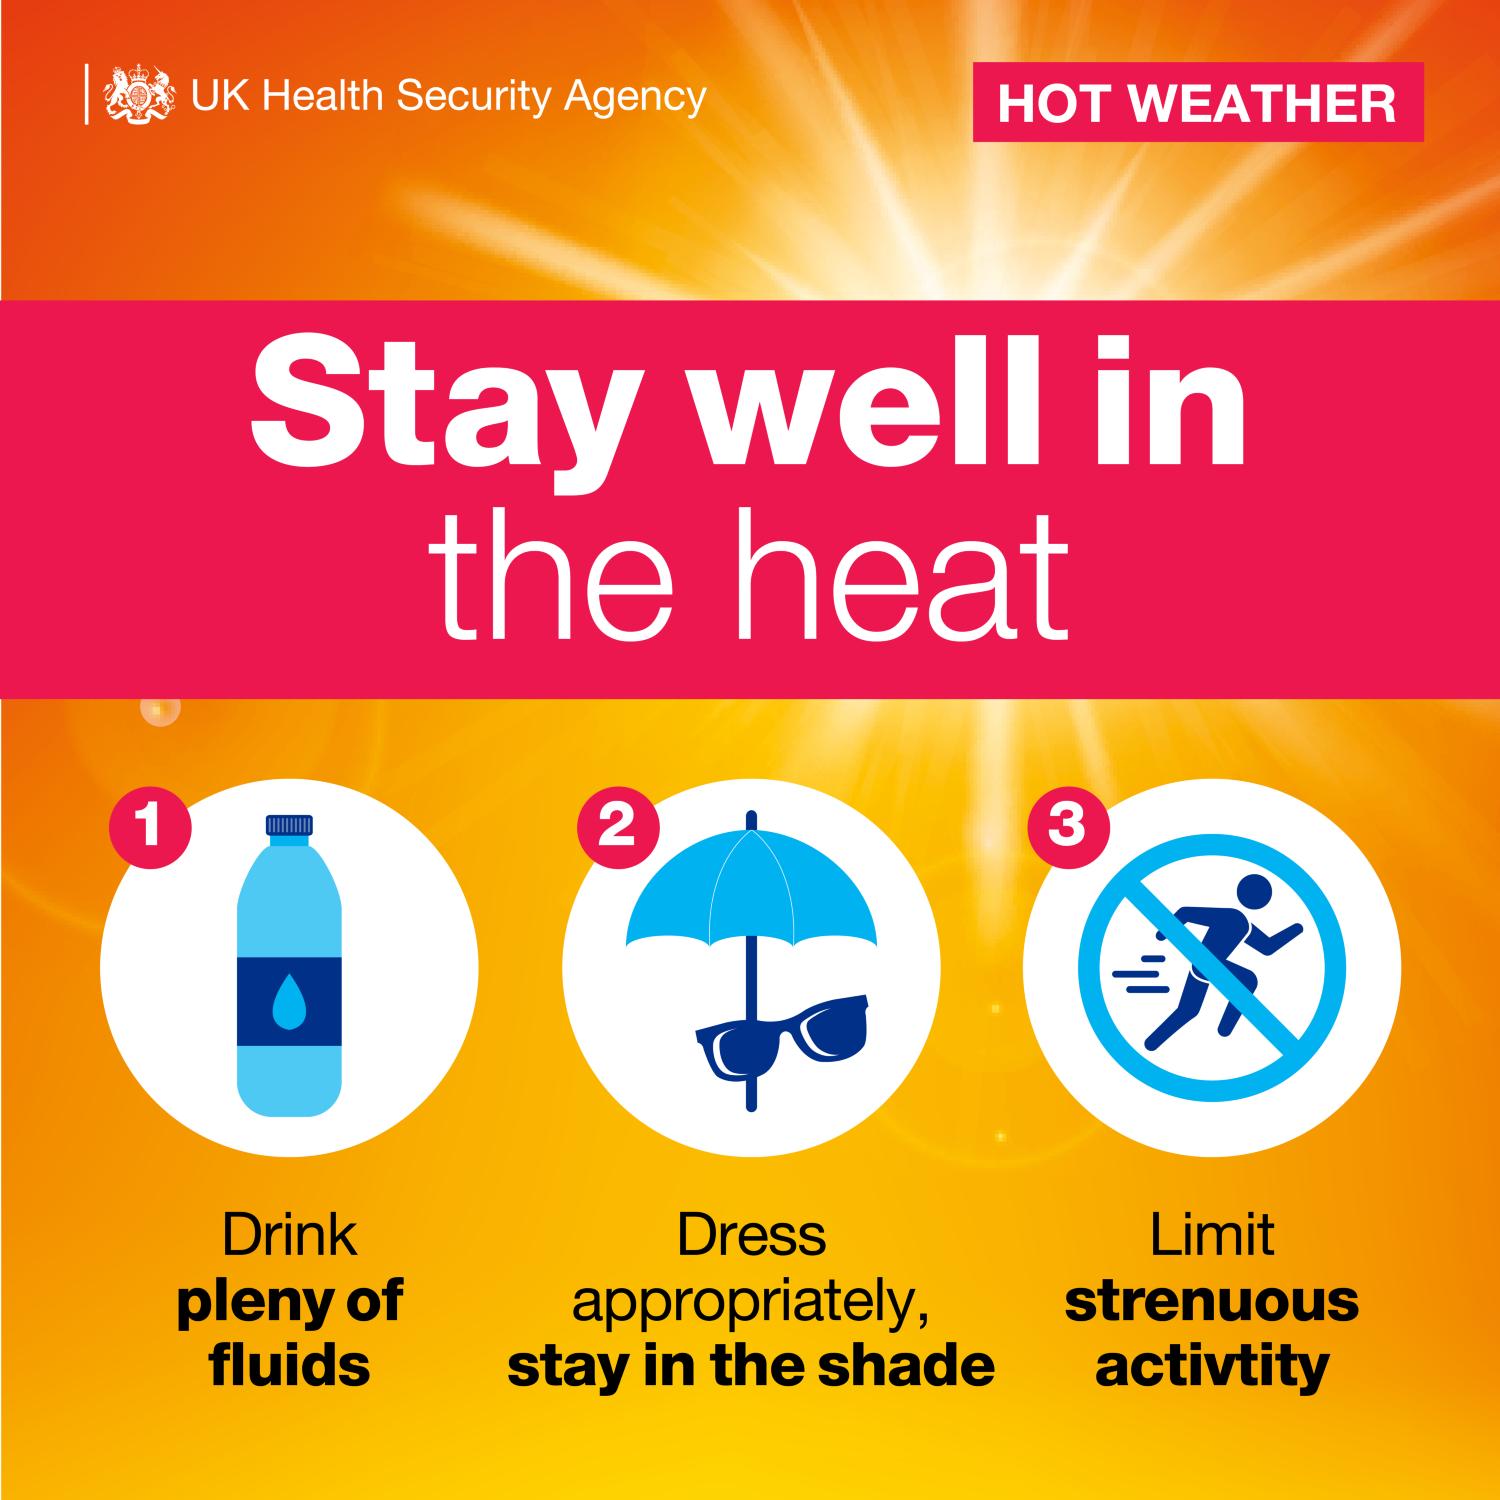 Hot weather health information graphic